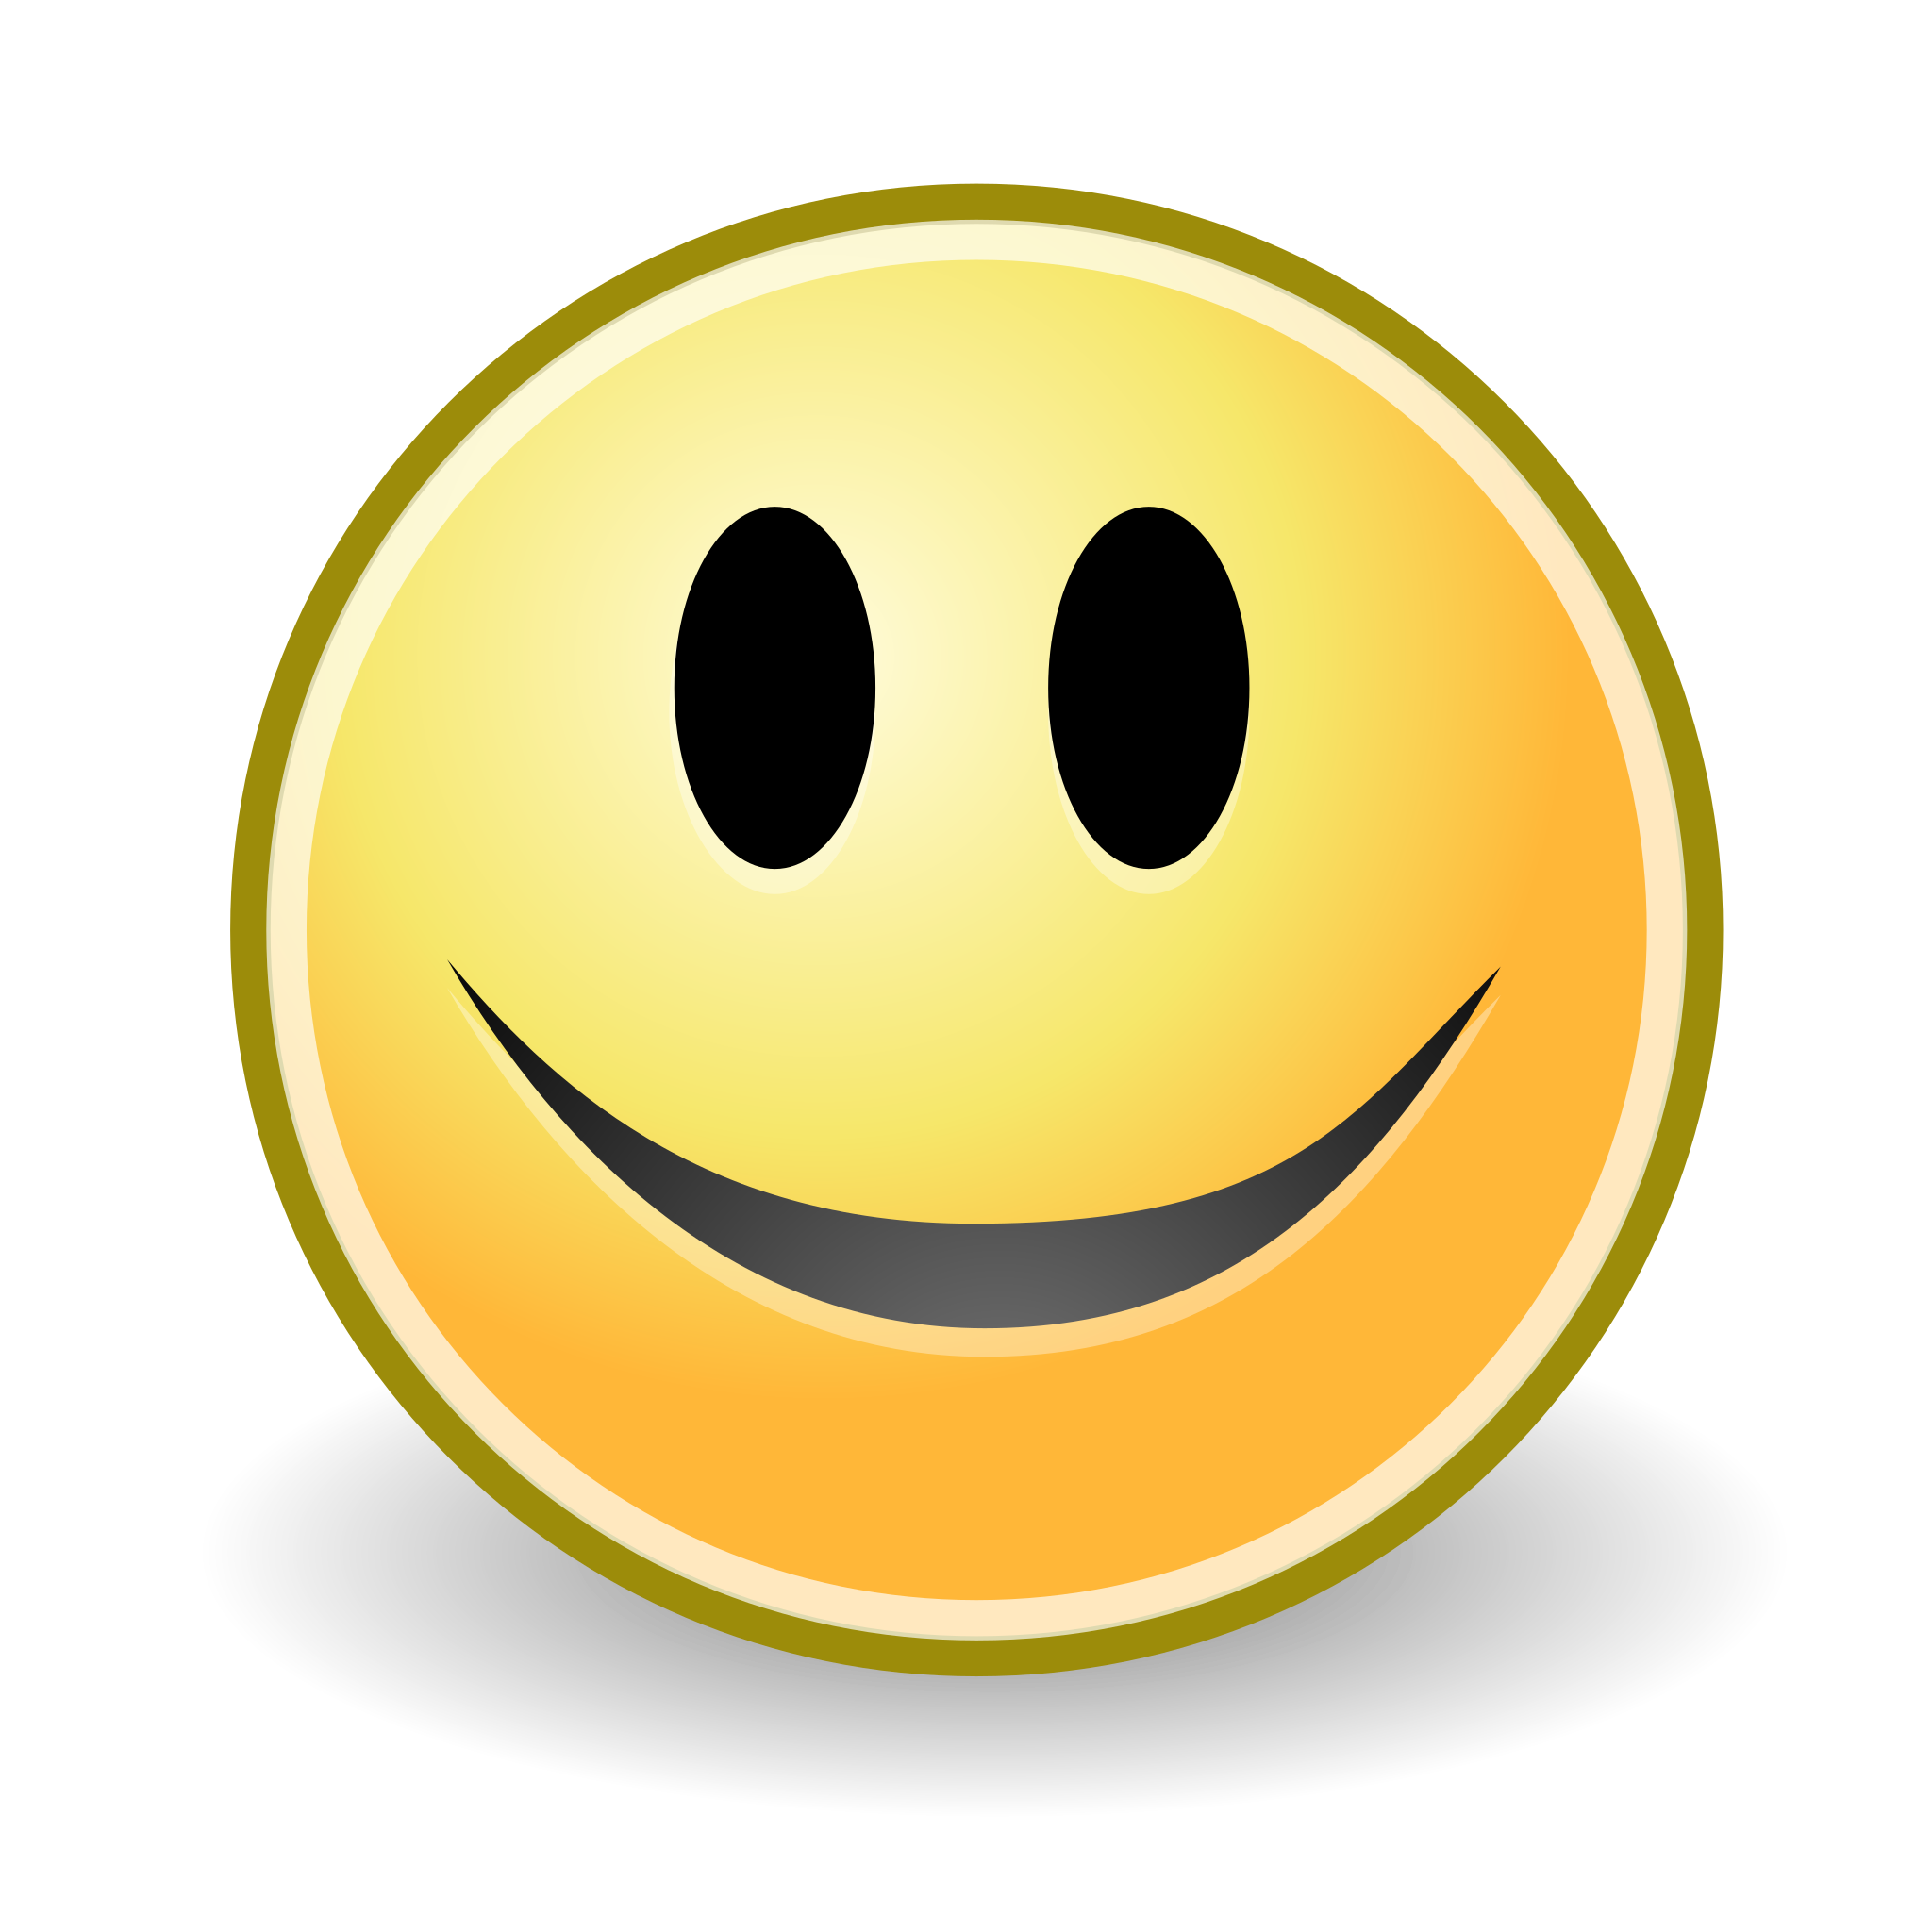 File:Happiness-Smiling-Face-Well-Being-Contentment.png